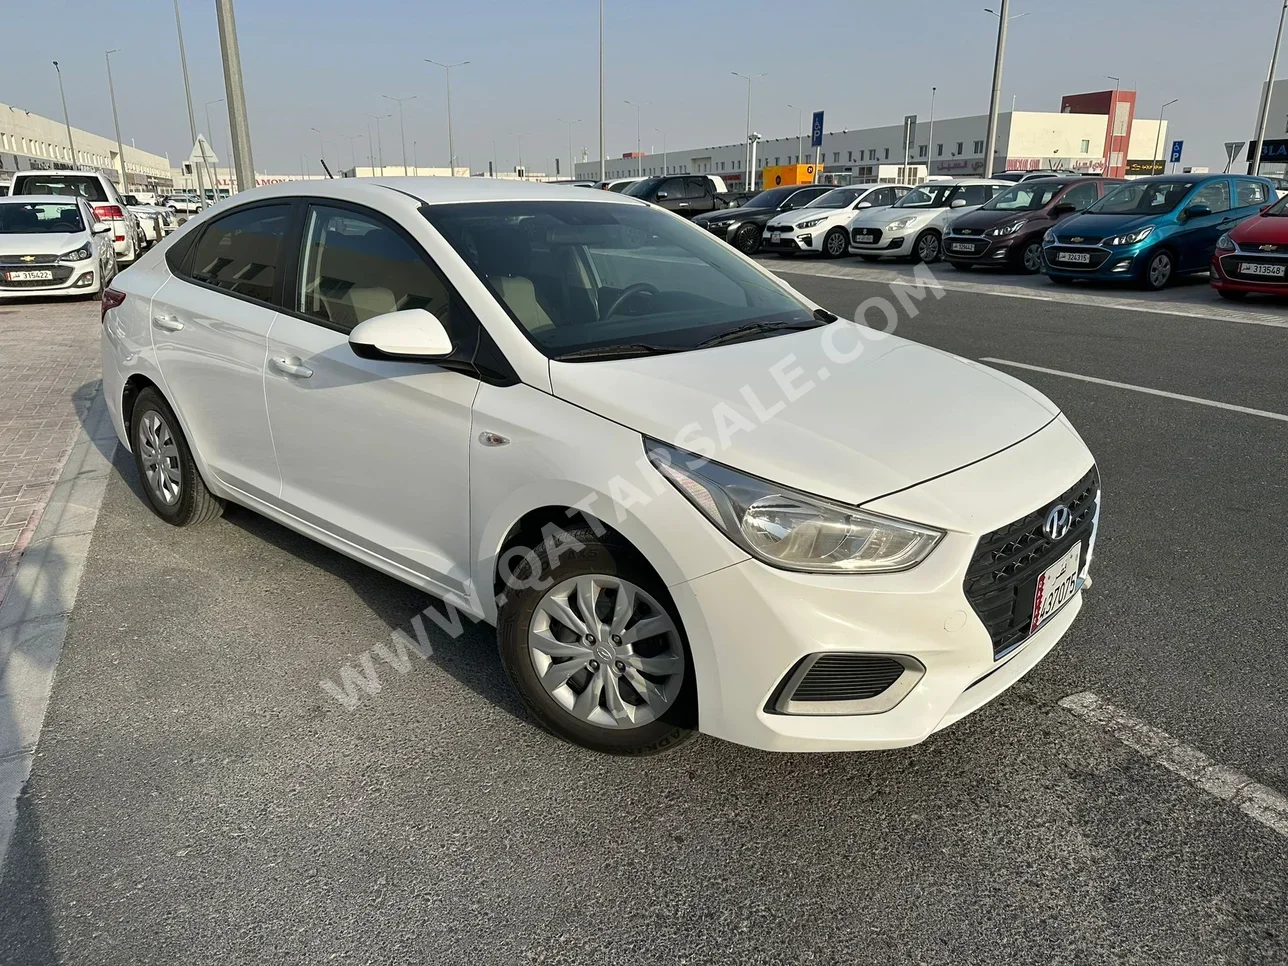 Hyundai  Accent  1.6  2019  Automatic  110,000 Km  4 Cylinder  Front Wheel Drive (FWD)  Sedan  White